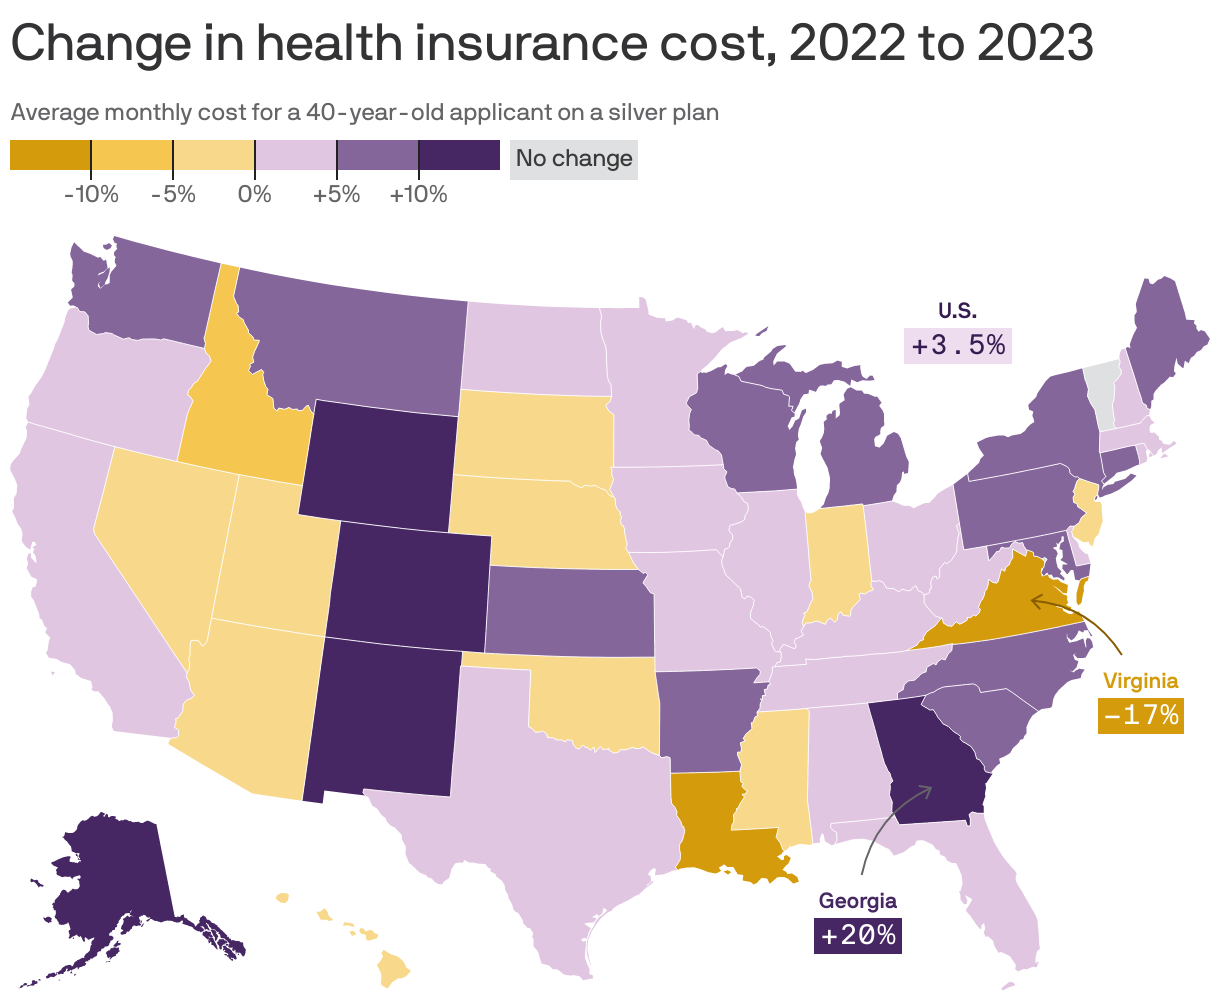 Change in health insurance cost, 2022 to 2023